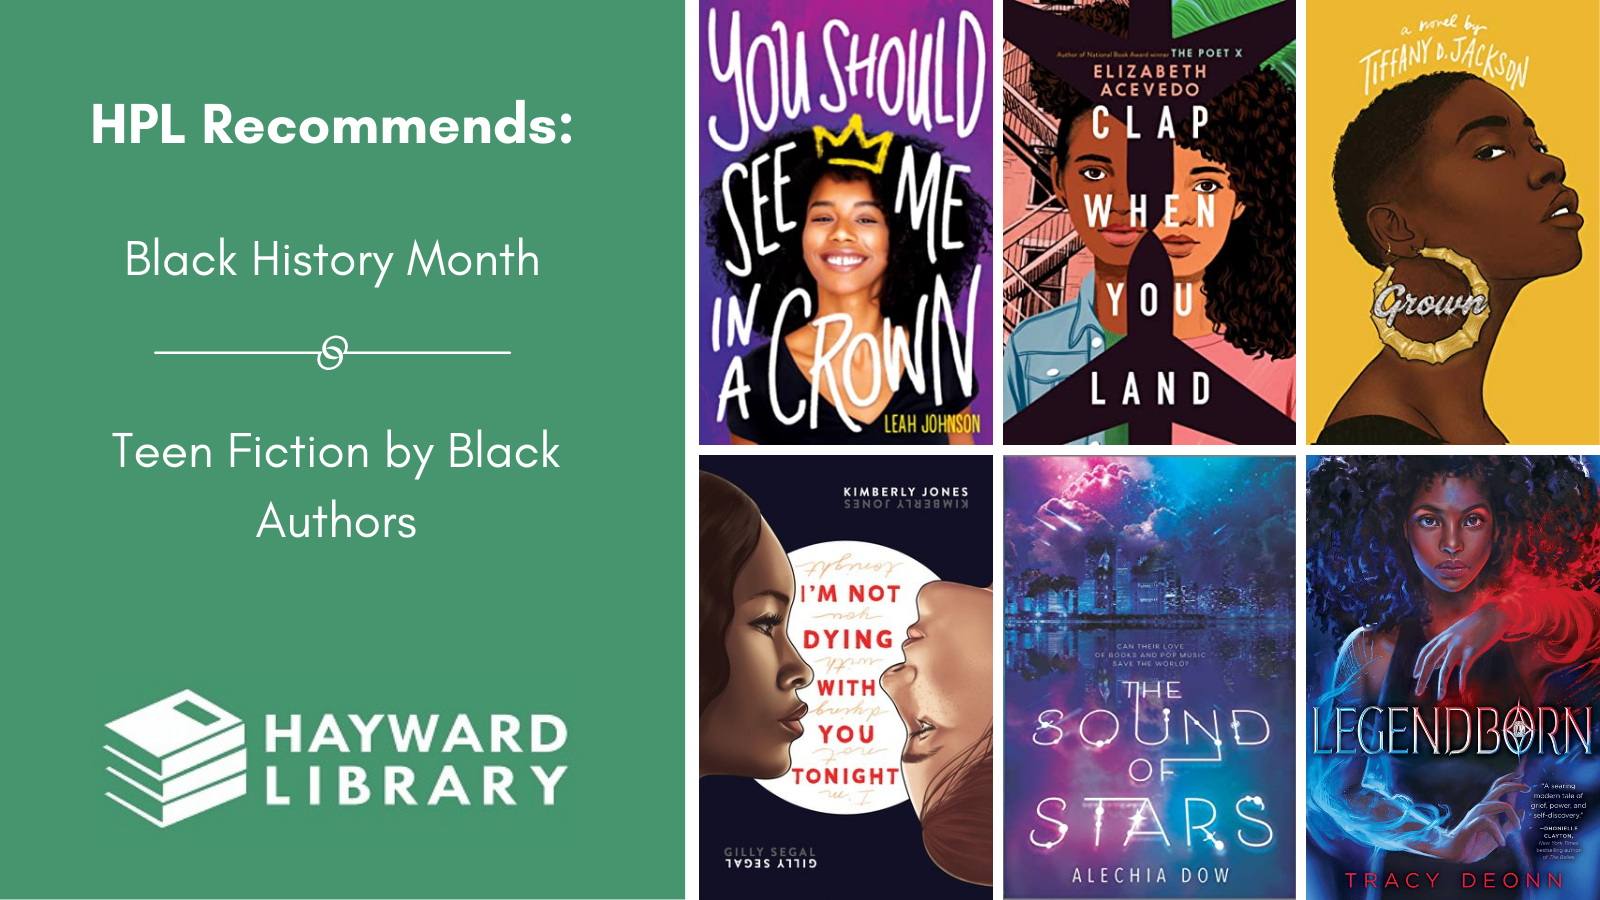 Collage of book covers with a green block on left side that says HPL Recommends, Black History Month, Teen Fiction by Black Authors in white text, with Hayward Library logo below it.